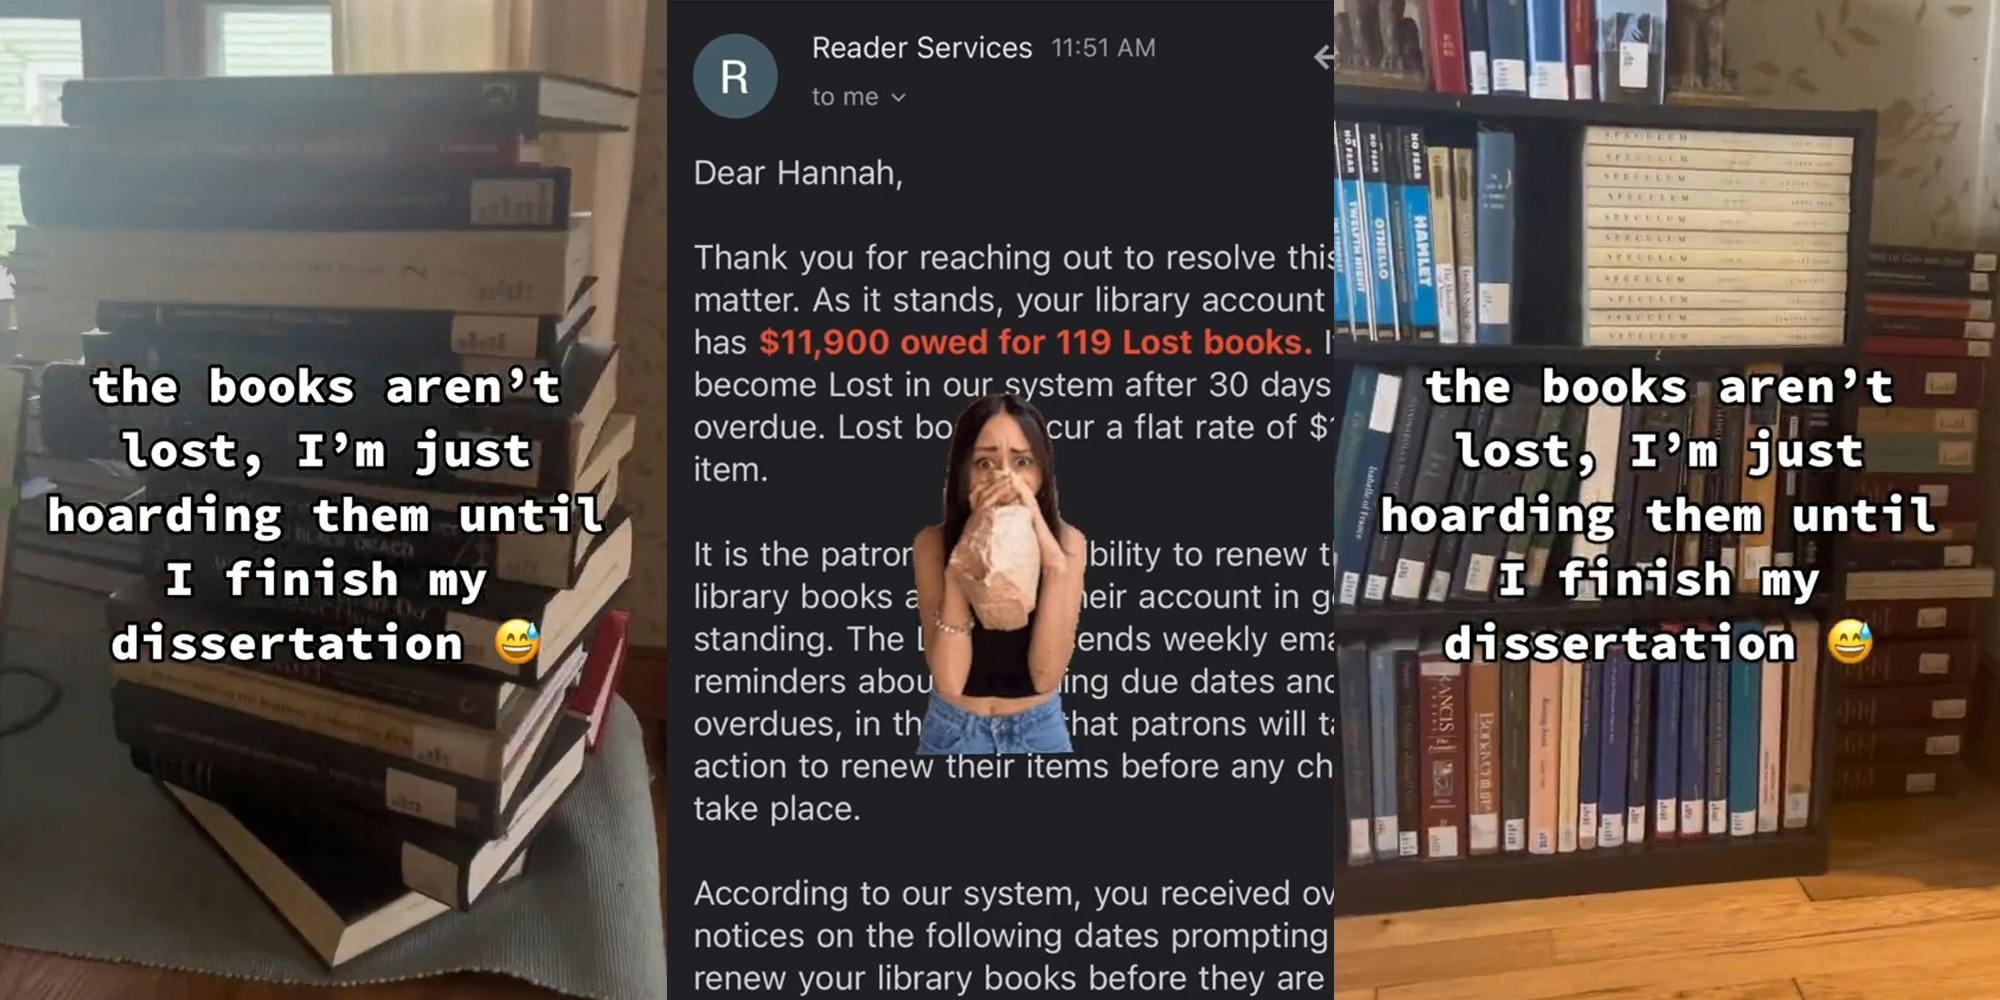 stack of books with caption "the books aren't lost, I'm just hoarding them until I finish my dissertation" (l) woman greenscreen TikTok over image of email with red text reading "$11,900 owed for 119 Lost books." (c) shelf of books with caption "the books aren't lost, I'm just hoarding them until I finish my dissertation" (r)